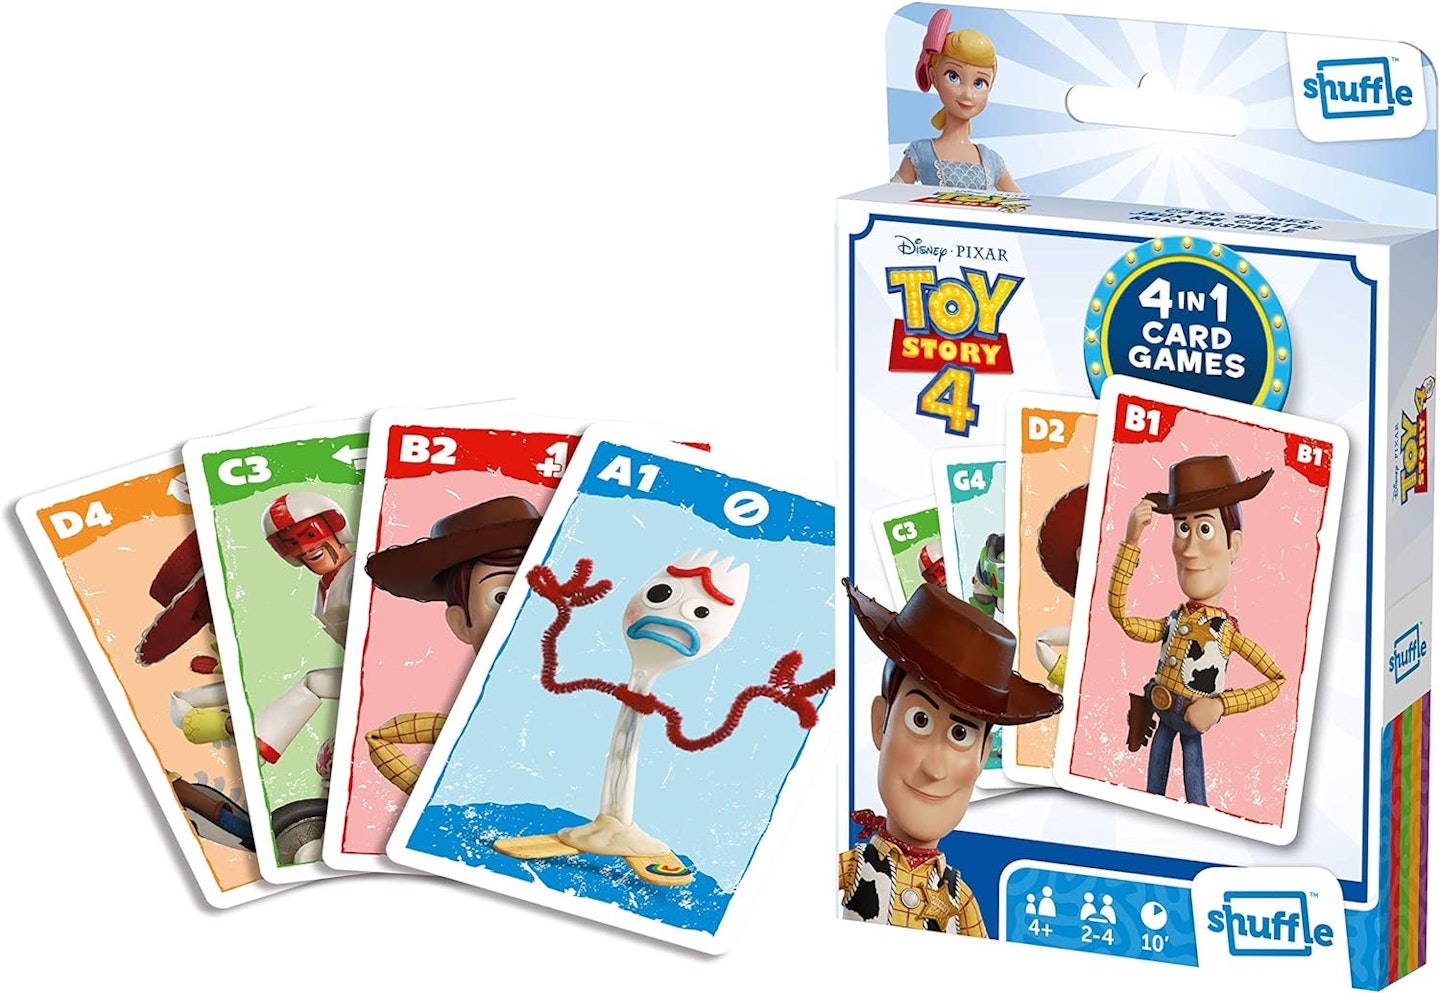 Shuffle Toy Story 4 Card Games For Kids - 4 in 1 Snap, Pairs, Happy Families & Action Game